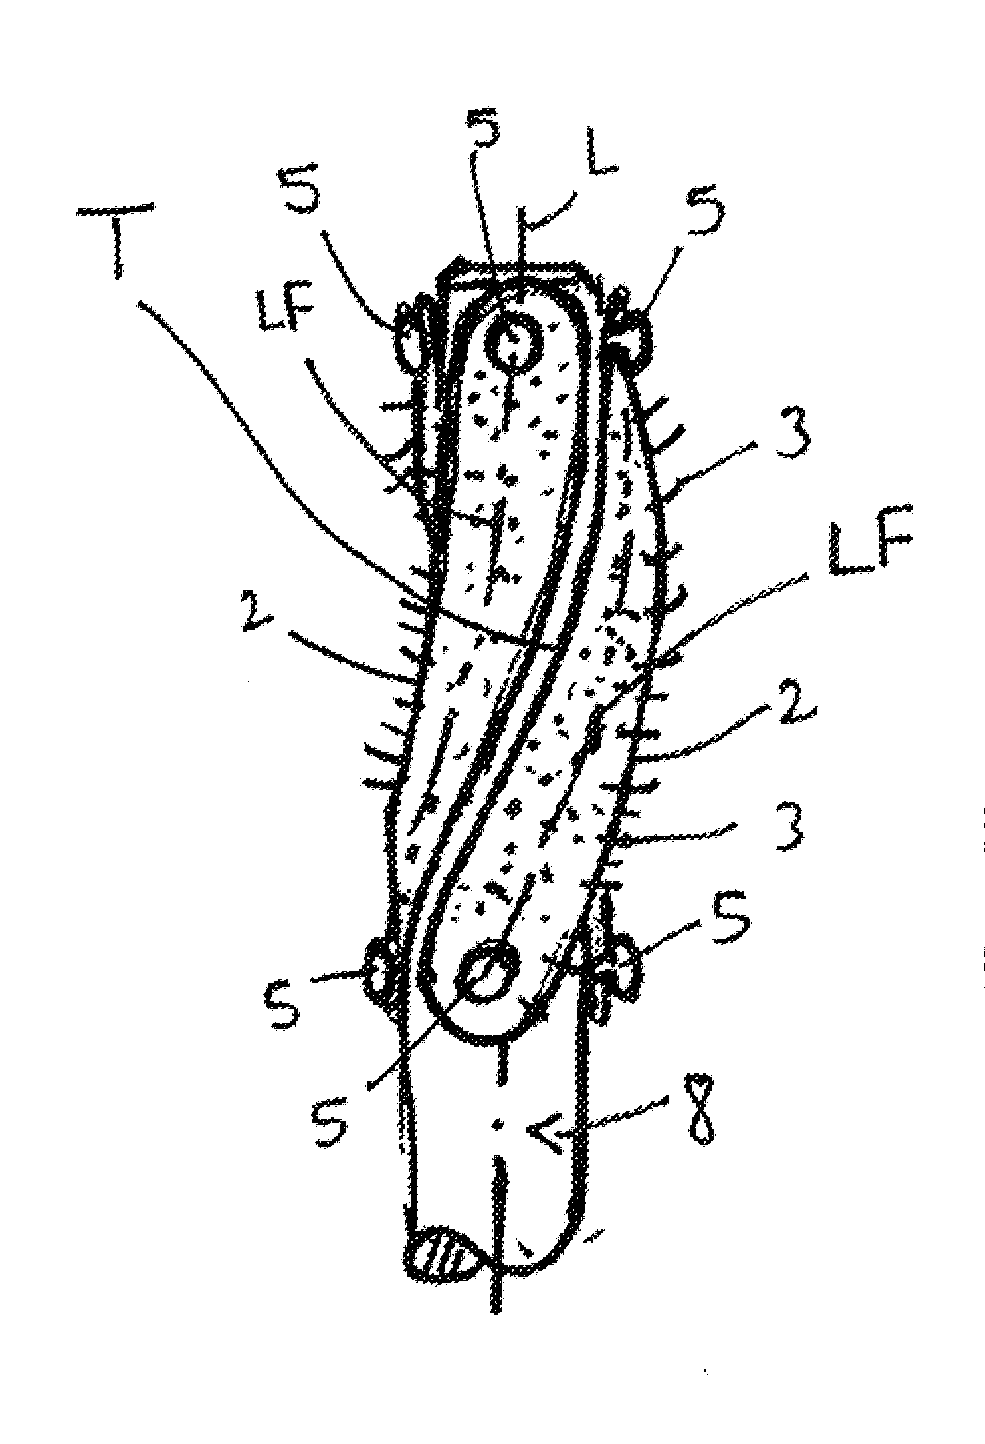 Applicator with separately produced and mounted bristle plates